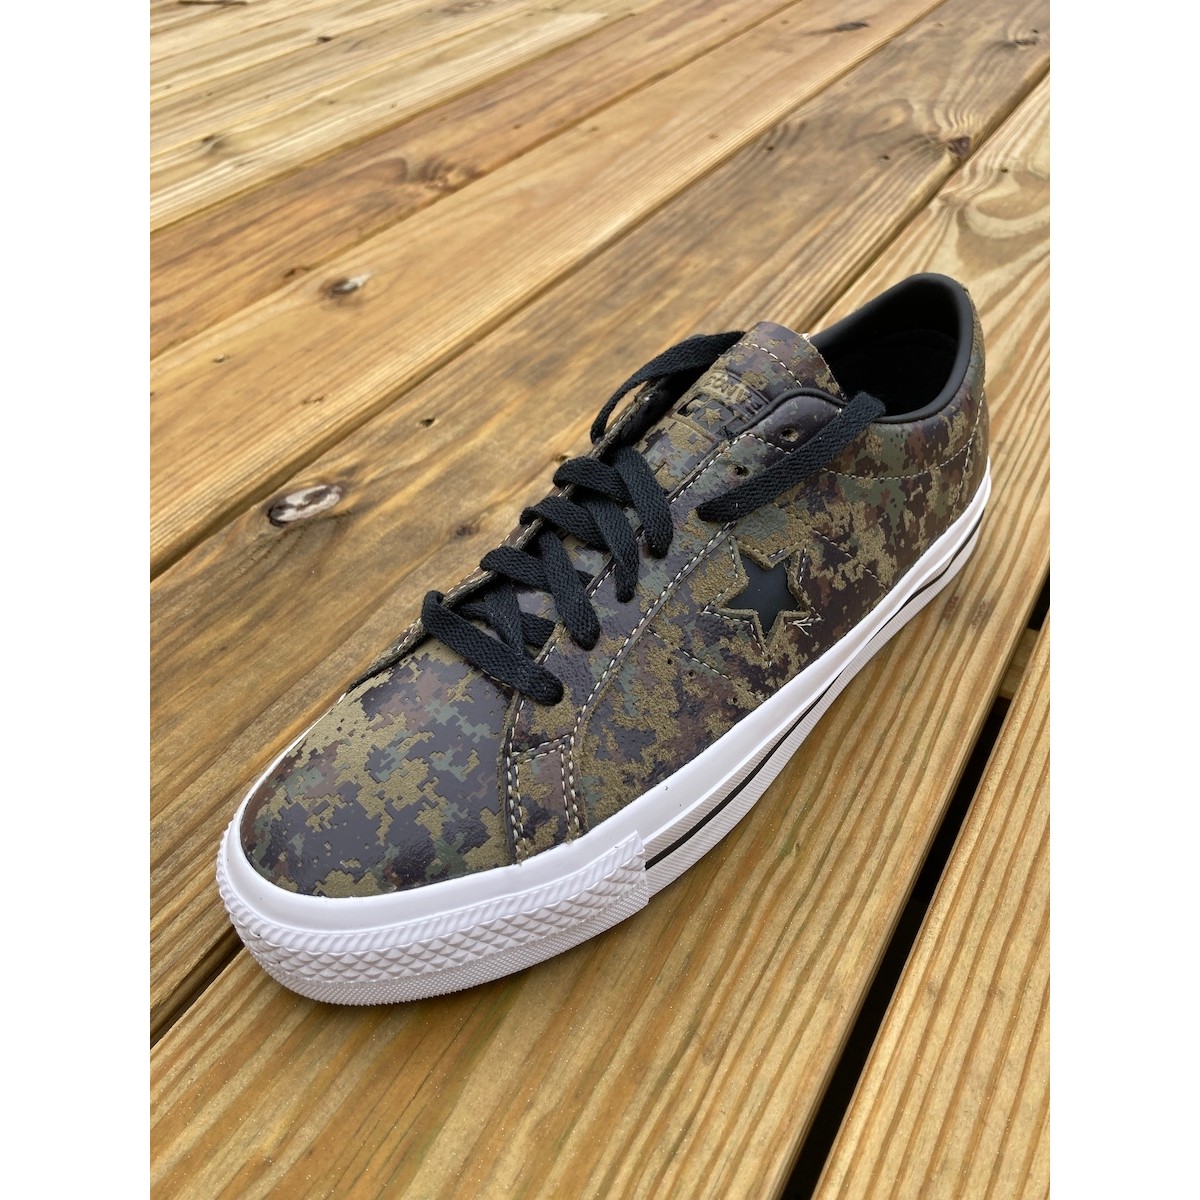 Converse One Star Pro Ox Footwear at Home Skateshop